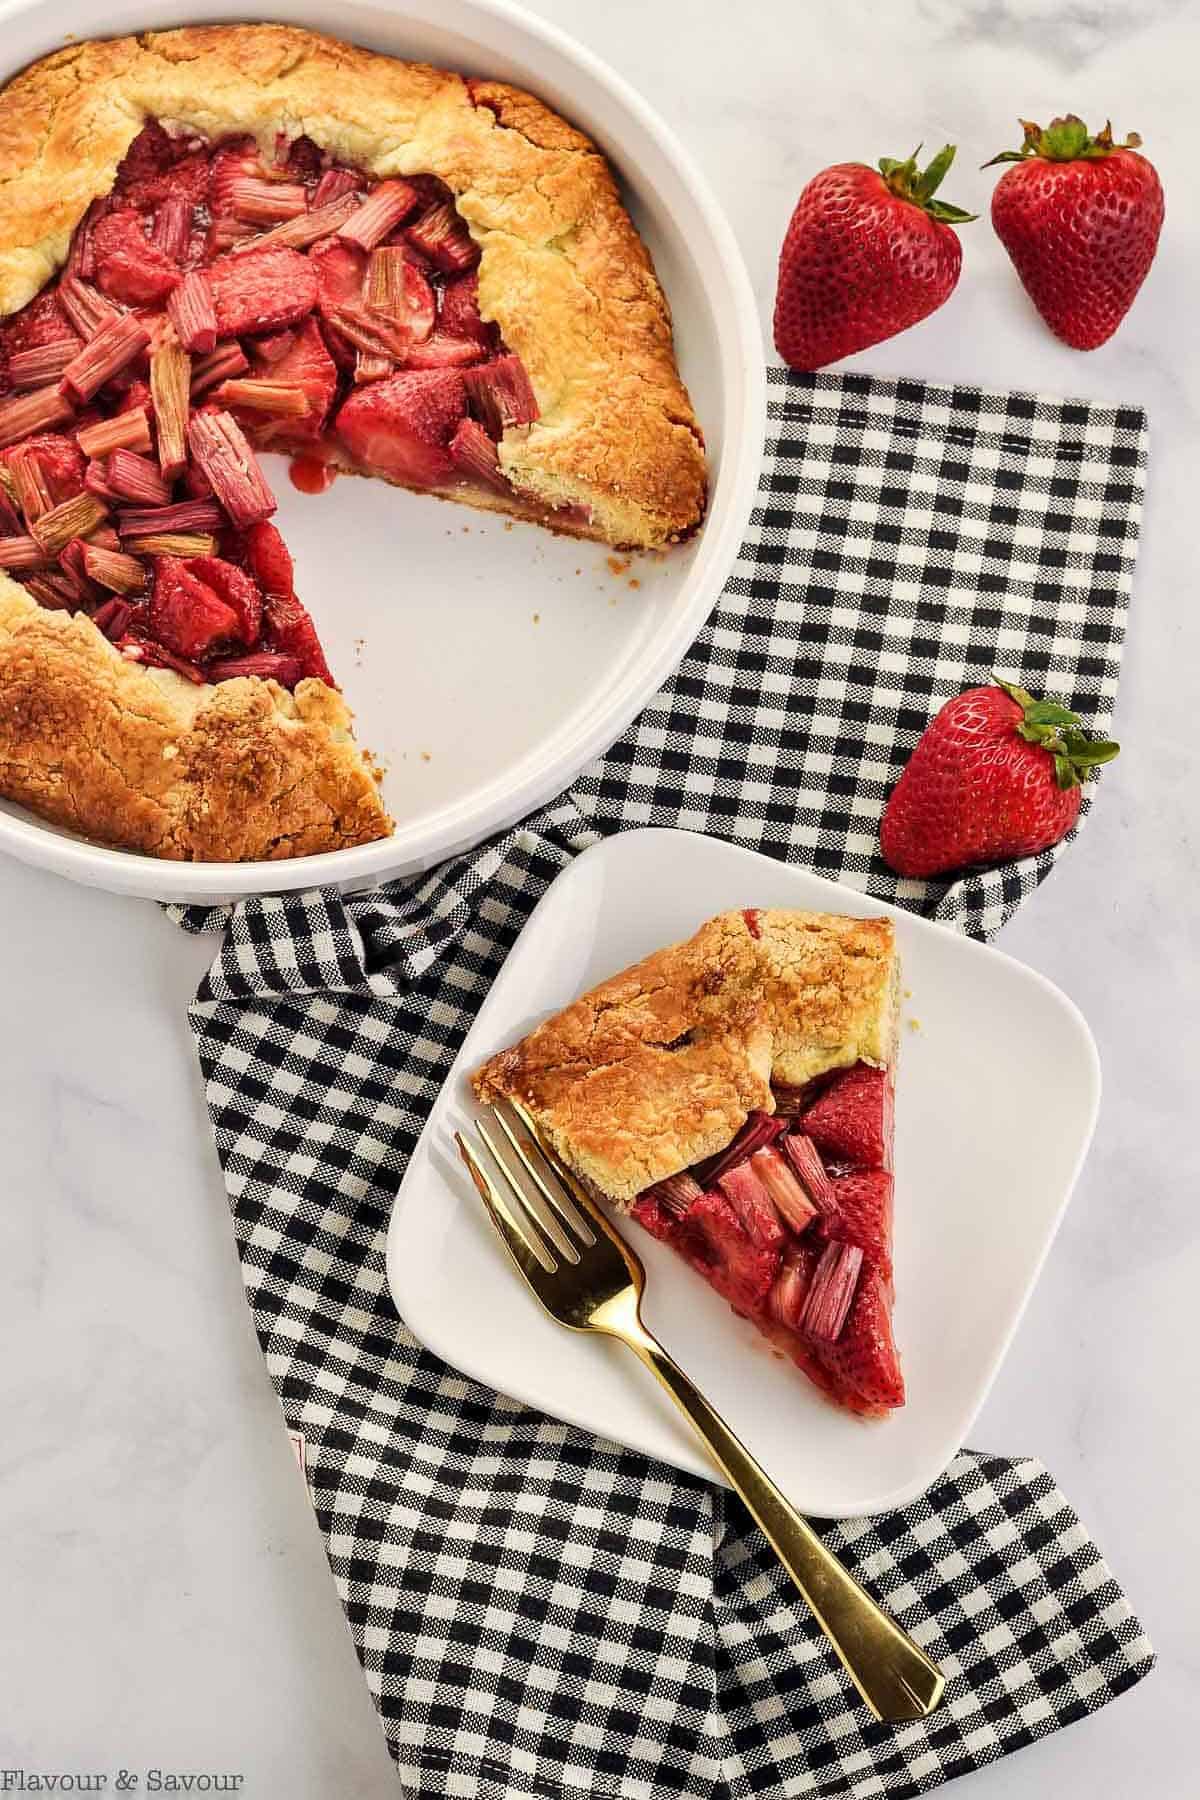 Strawberry Rhubarb Galette in a round white dish with a slice of galette on a small square plate.